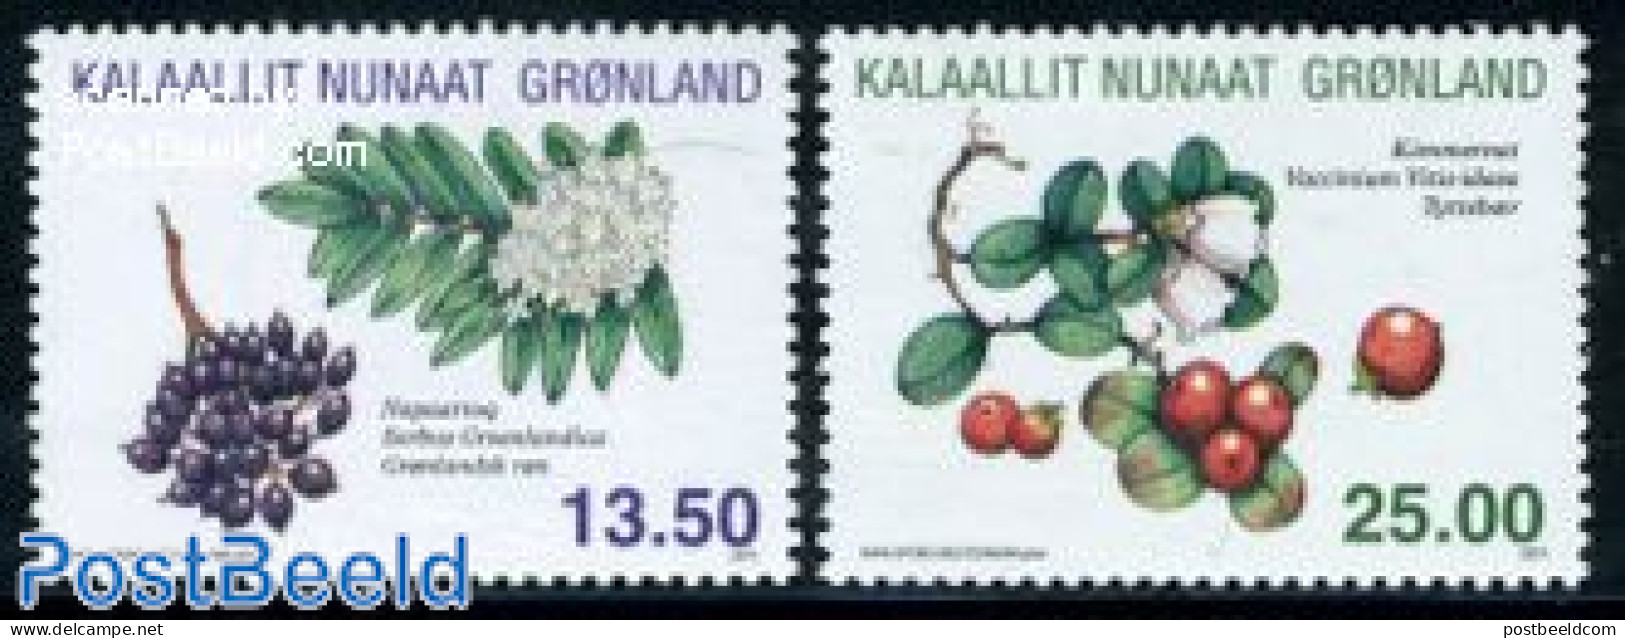 Greenland 2011 Herbs 2v, Mint NH, Nature - Flowers & Plants - Fruit - Unused Stamps